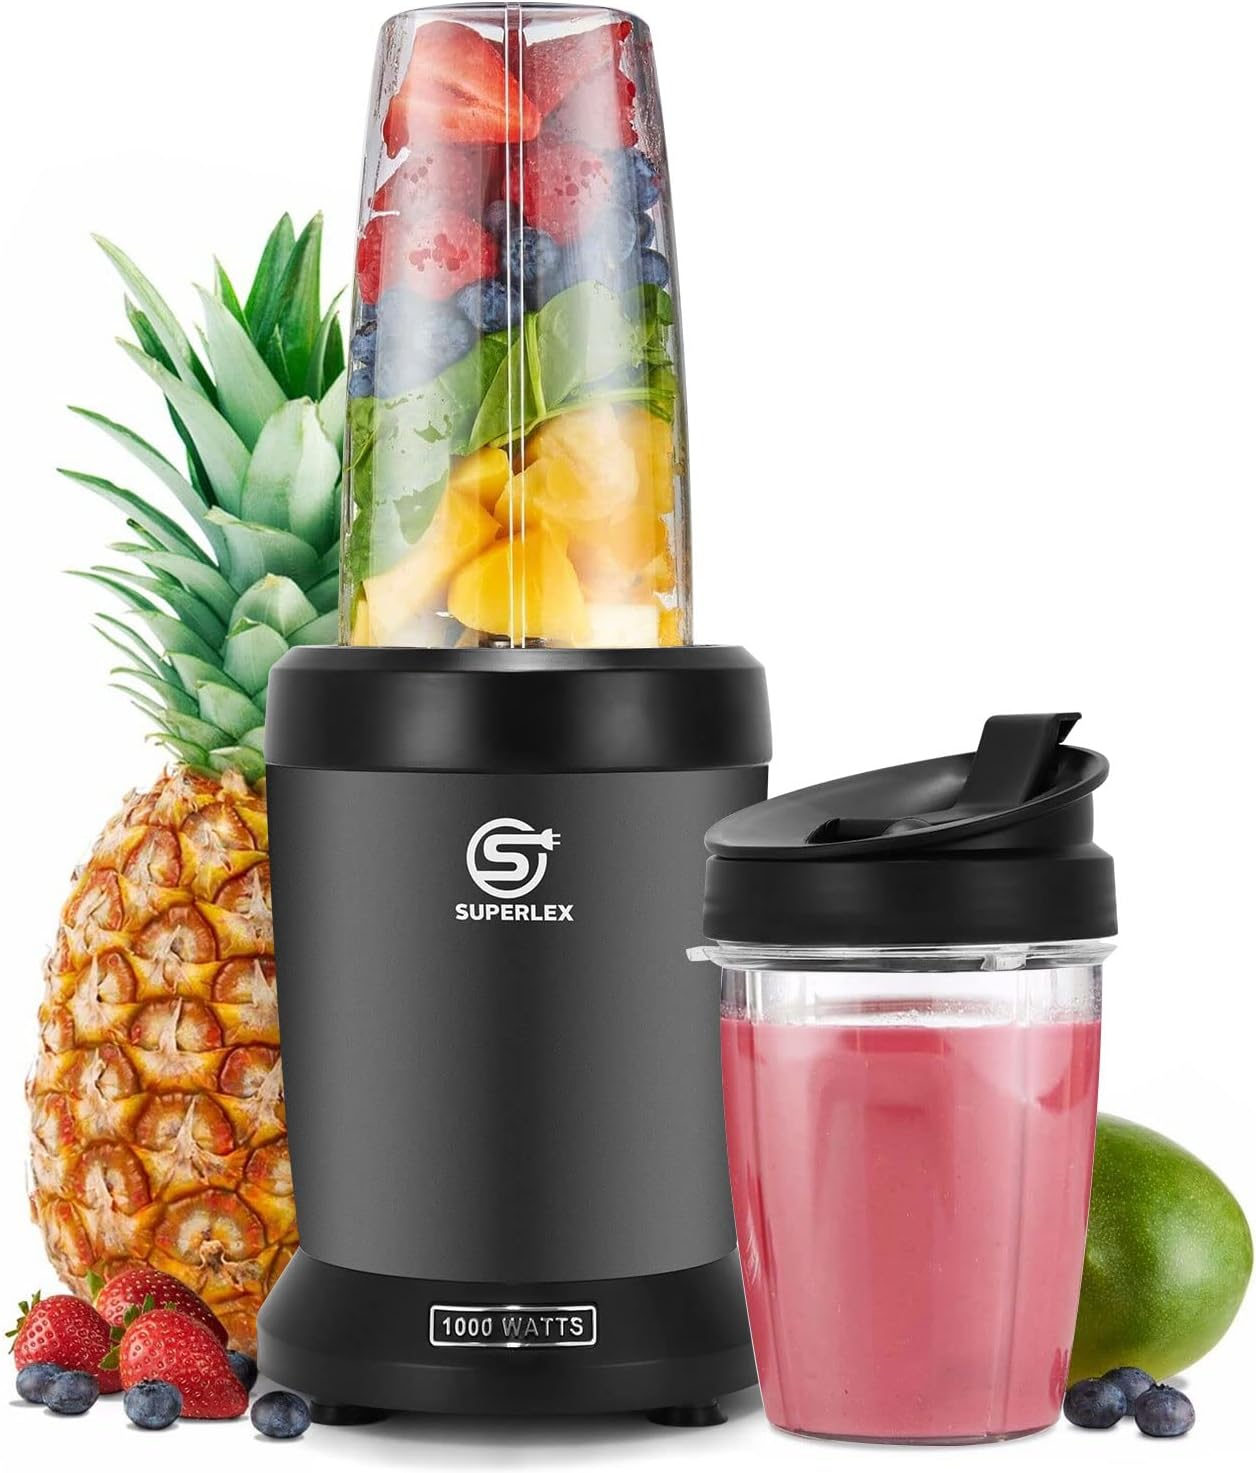 Superlex Electric Bullet Mixer Set, 1000 Watt, Smoothie Maker With 6-Way Stainless Steel Blade, with 2 Mix Containers, 800 ml + 1 Litre Container (BPA Free)